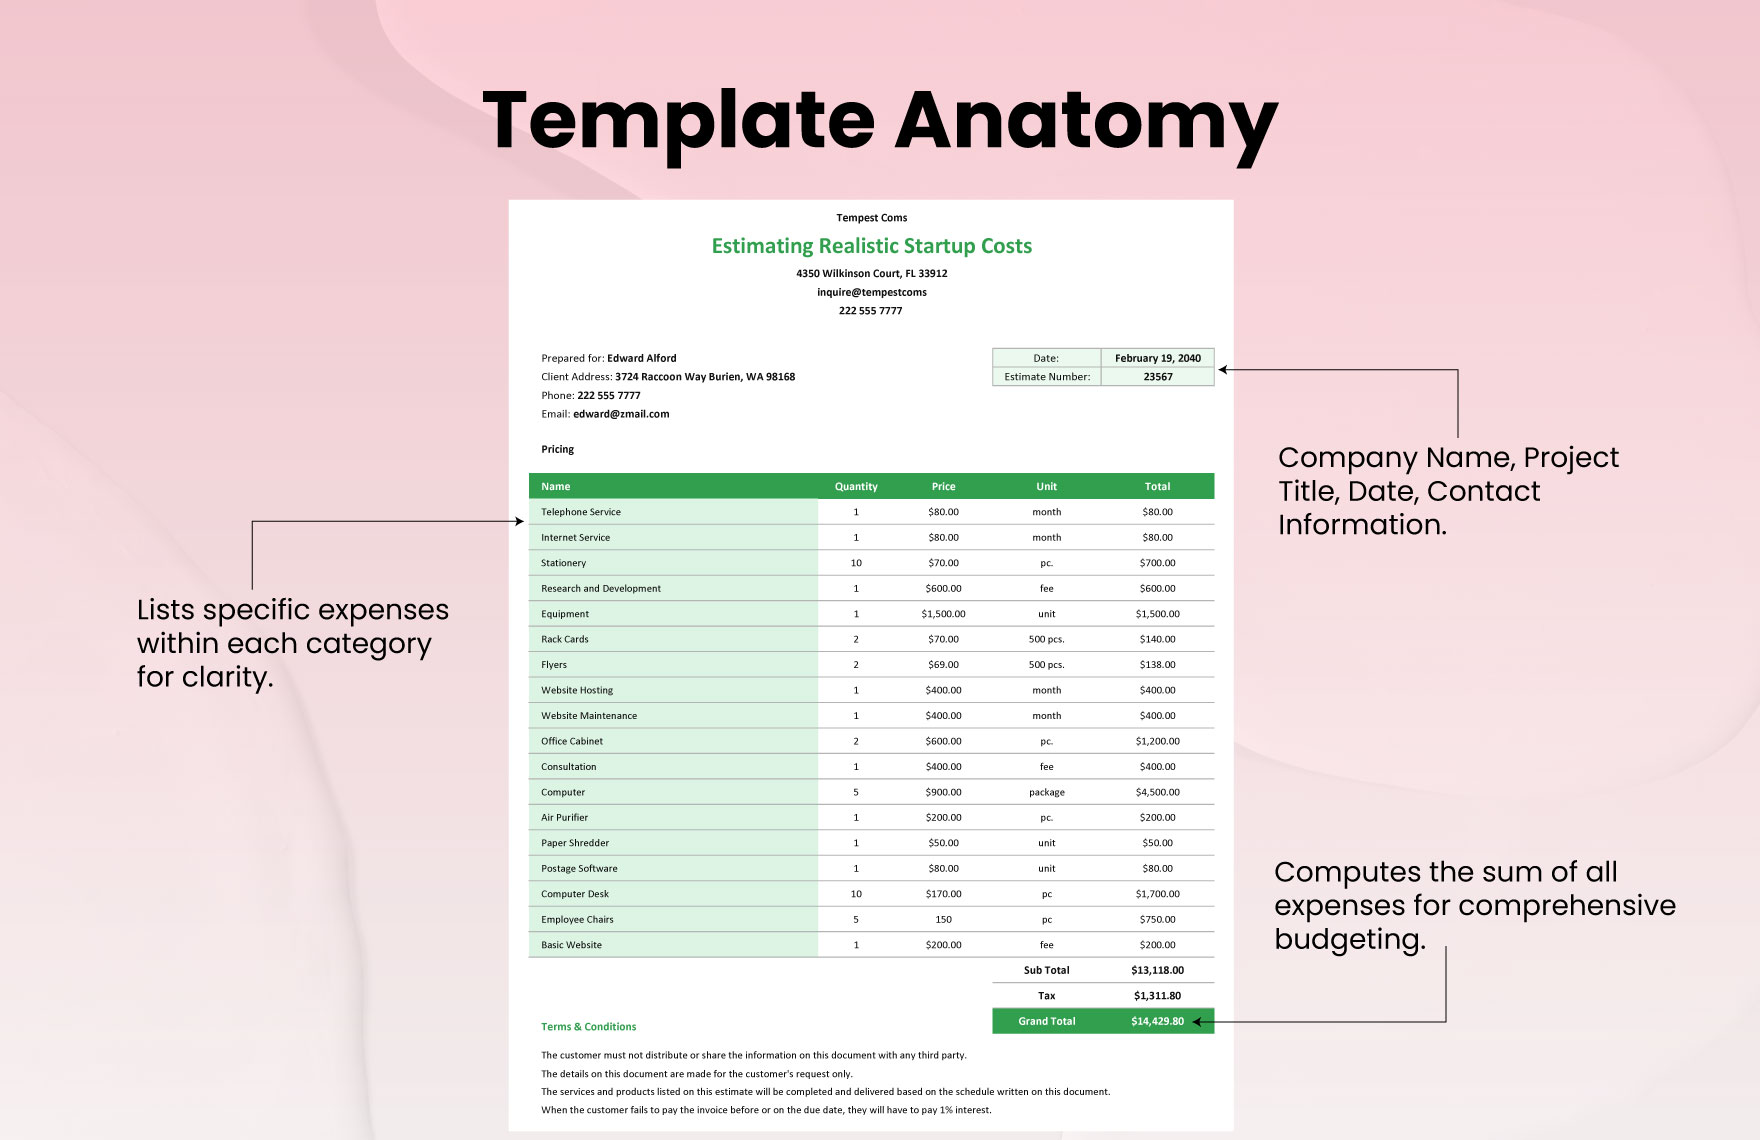 Estimating Realistic Startup Costs Template